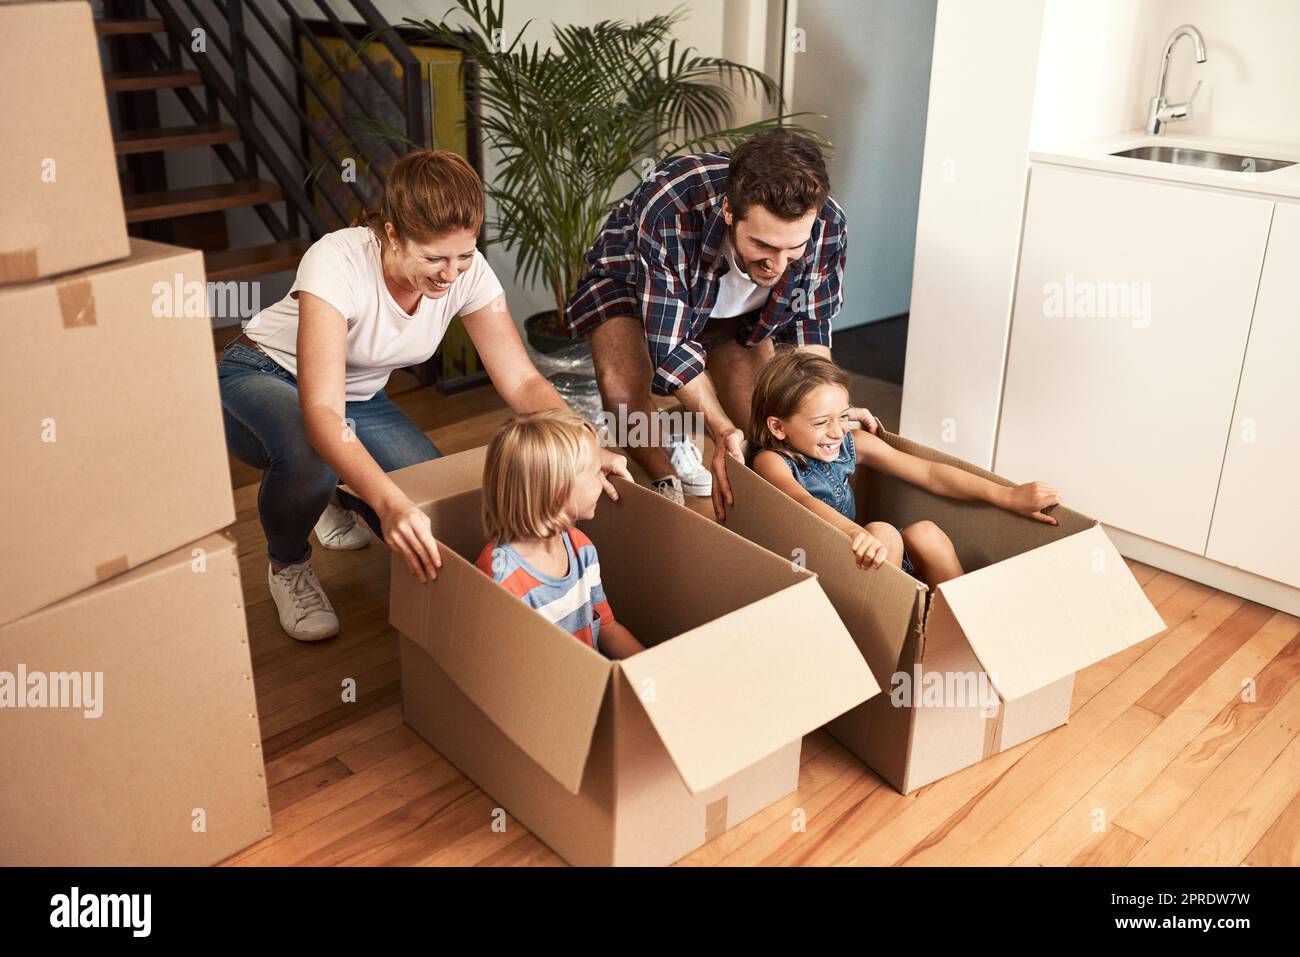 As long as were together, were home. a young family on their moving day. Stock Photo